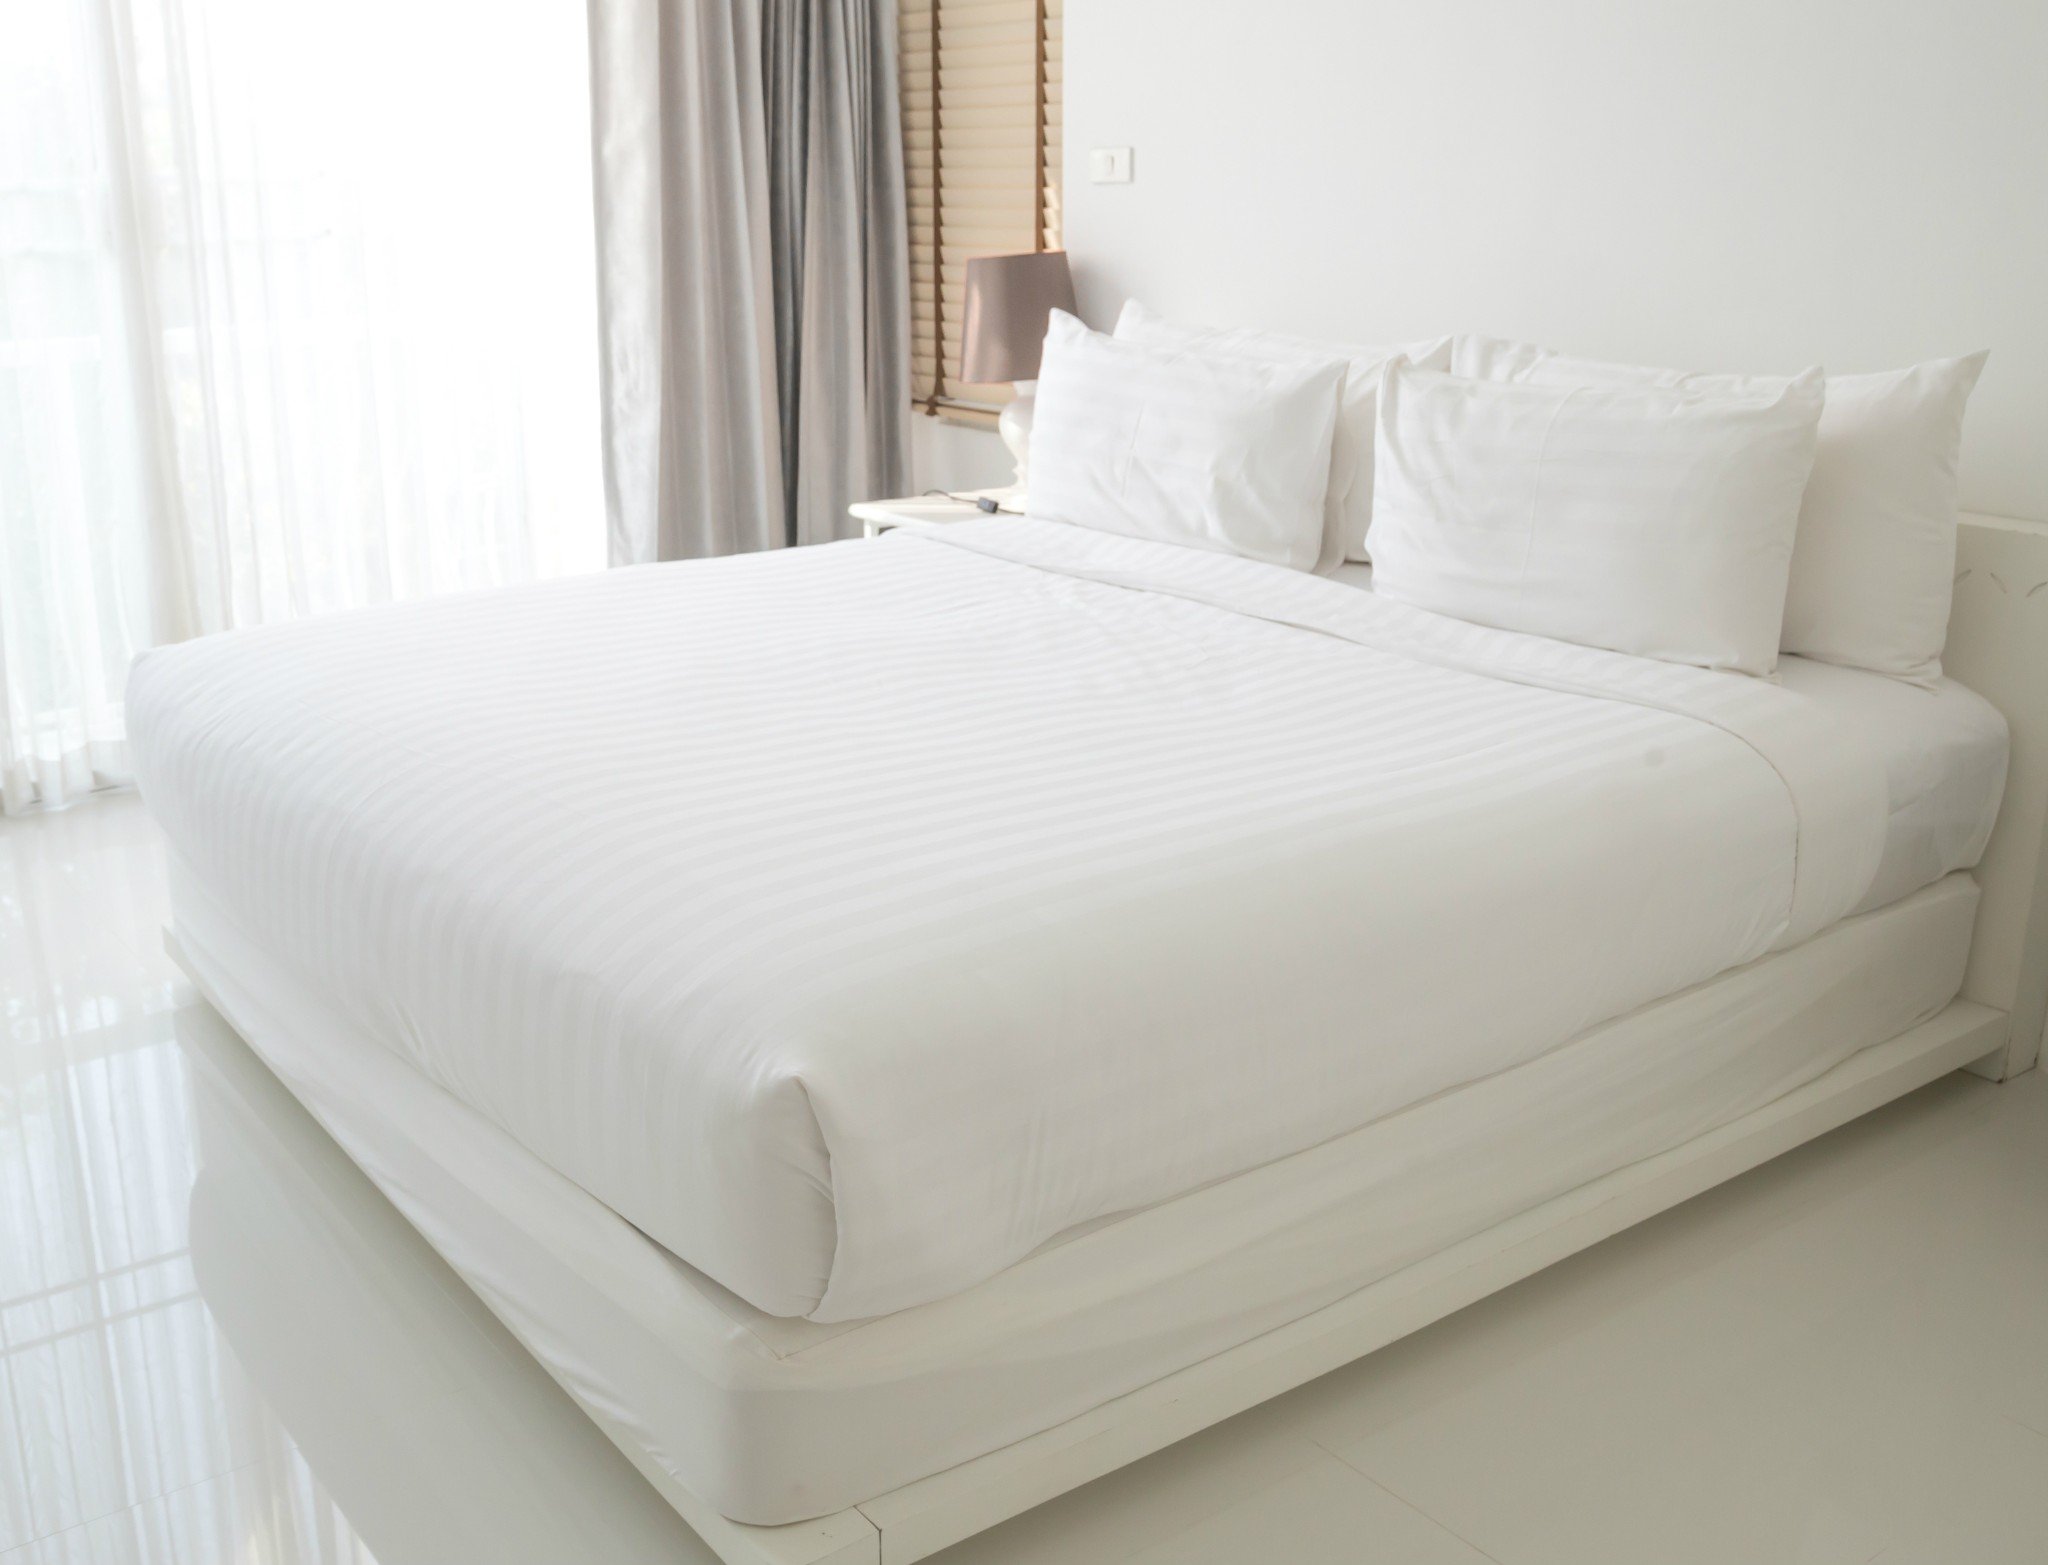 fitted bed sheet for thick mattress